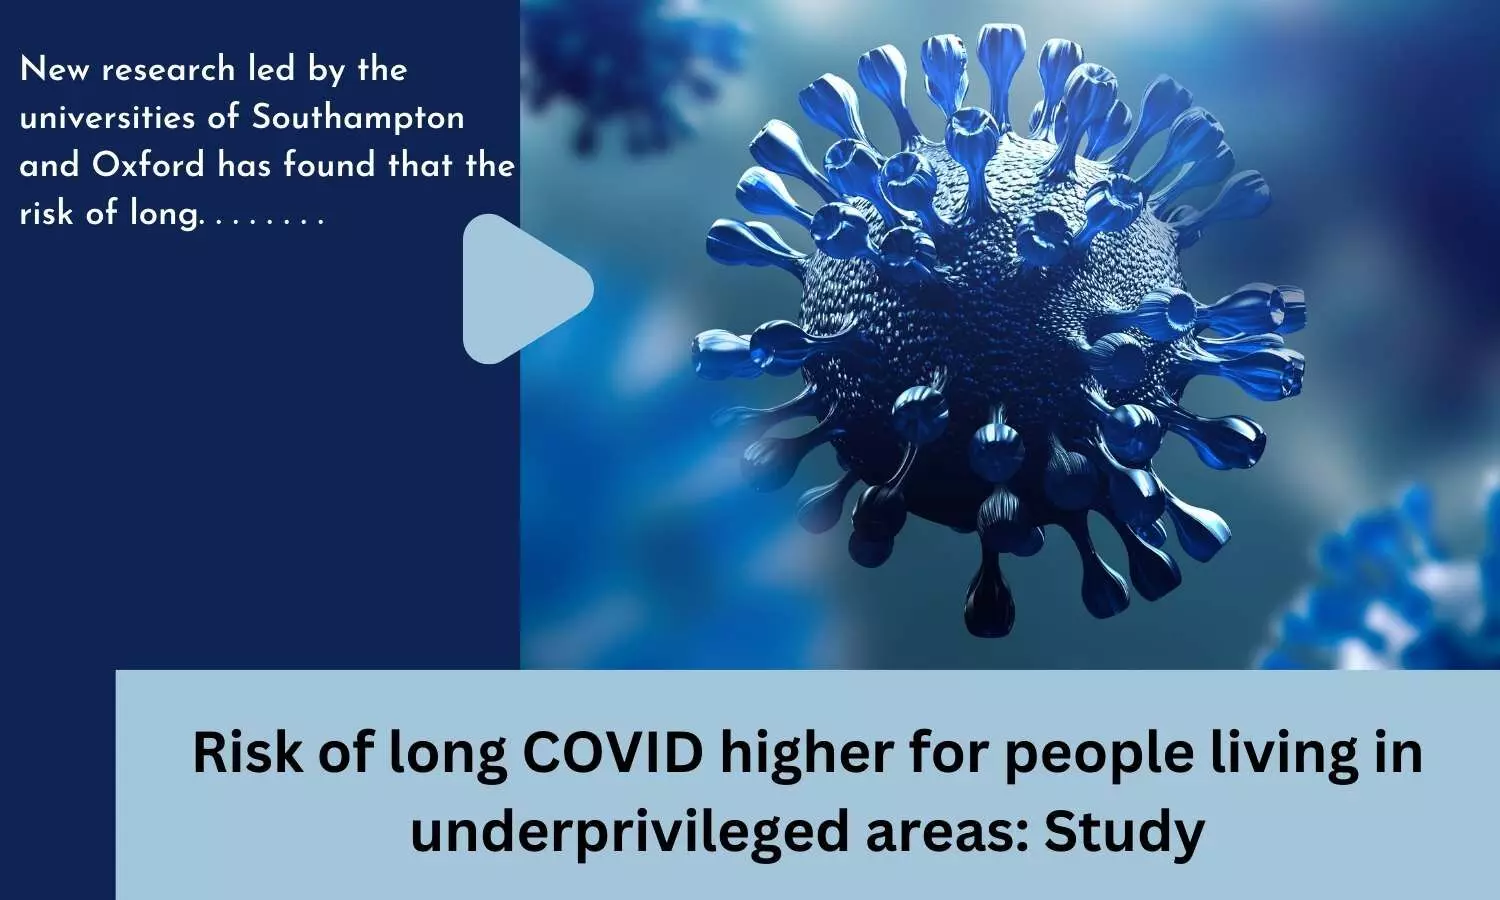 Risk of long COVID higher for people living in underprivileged areas: Study